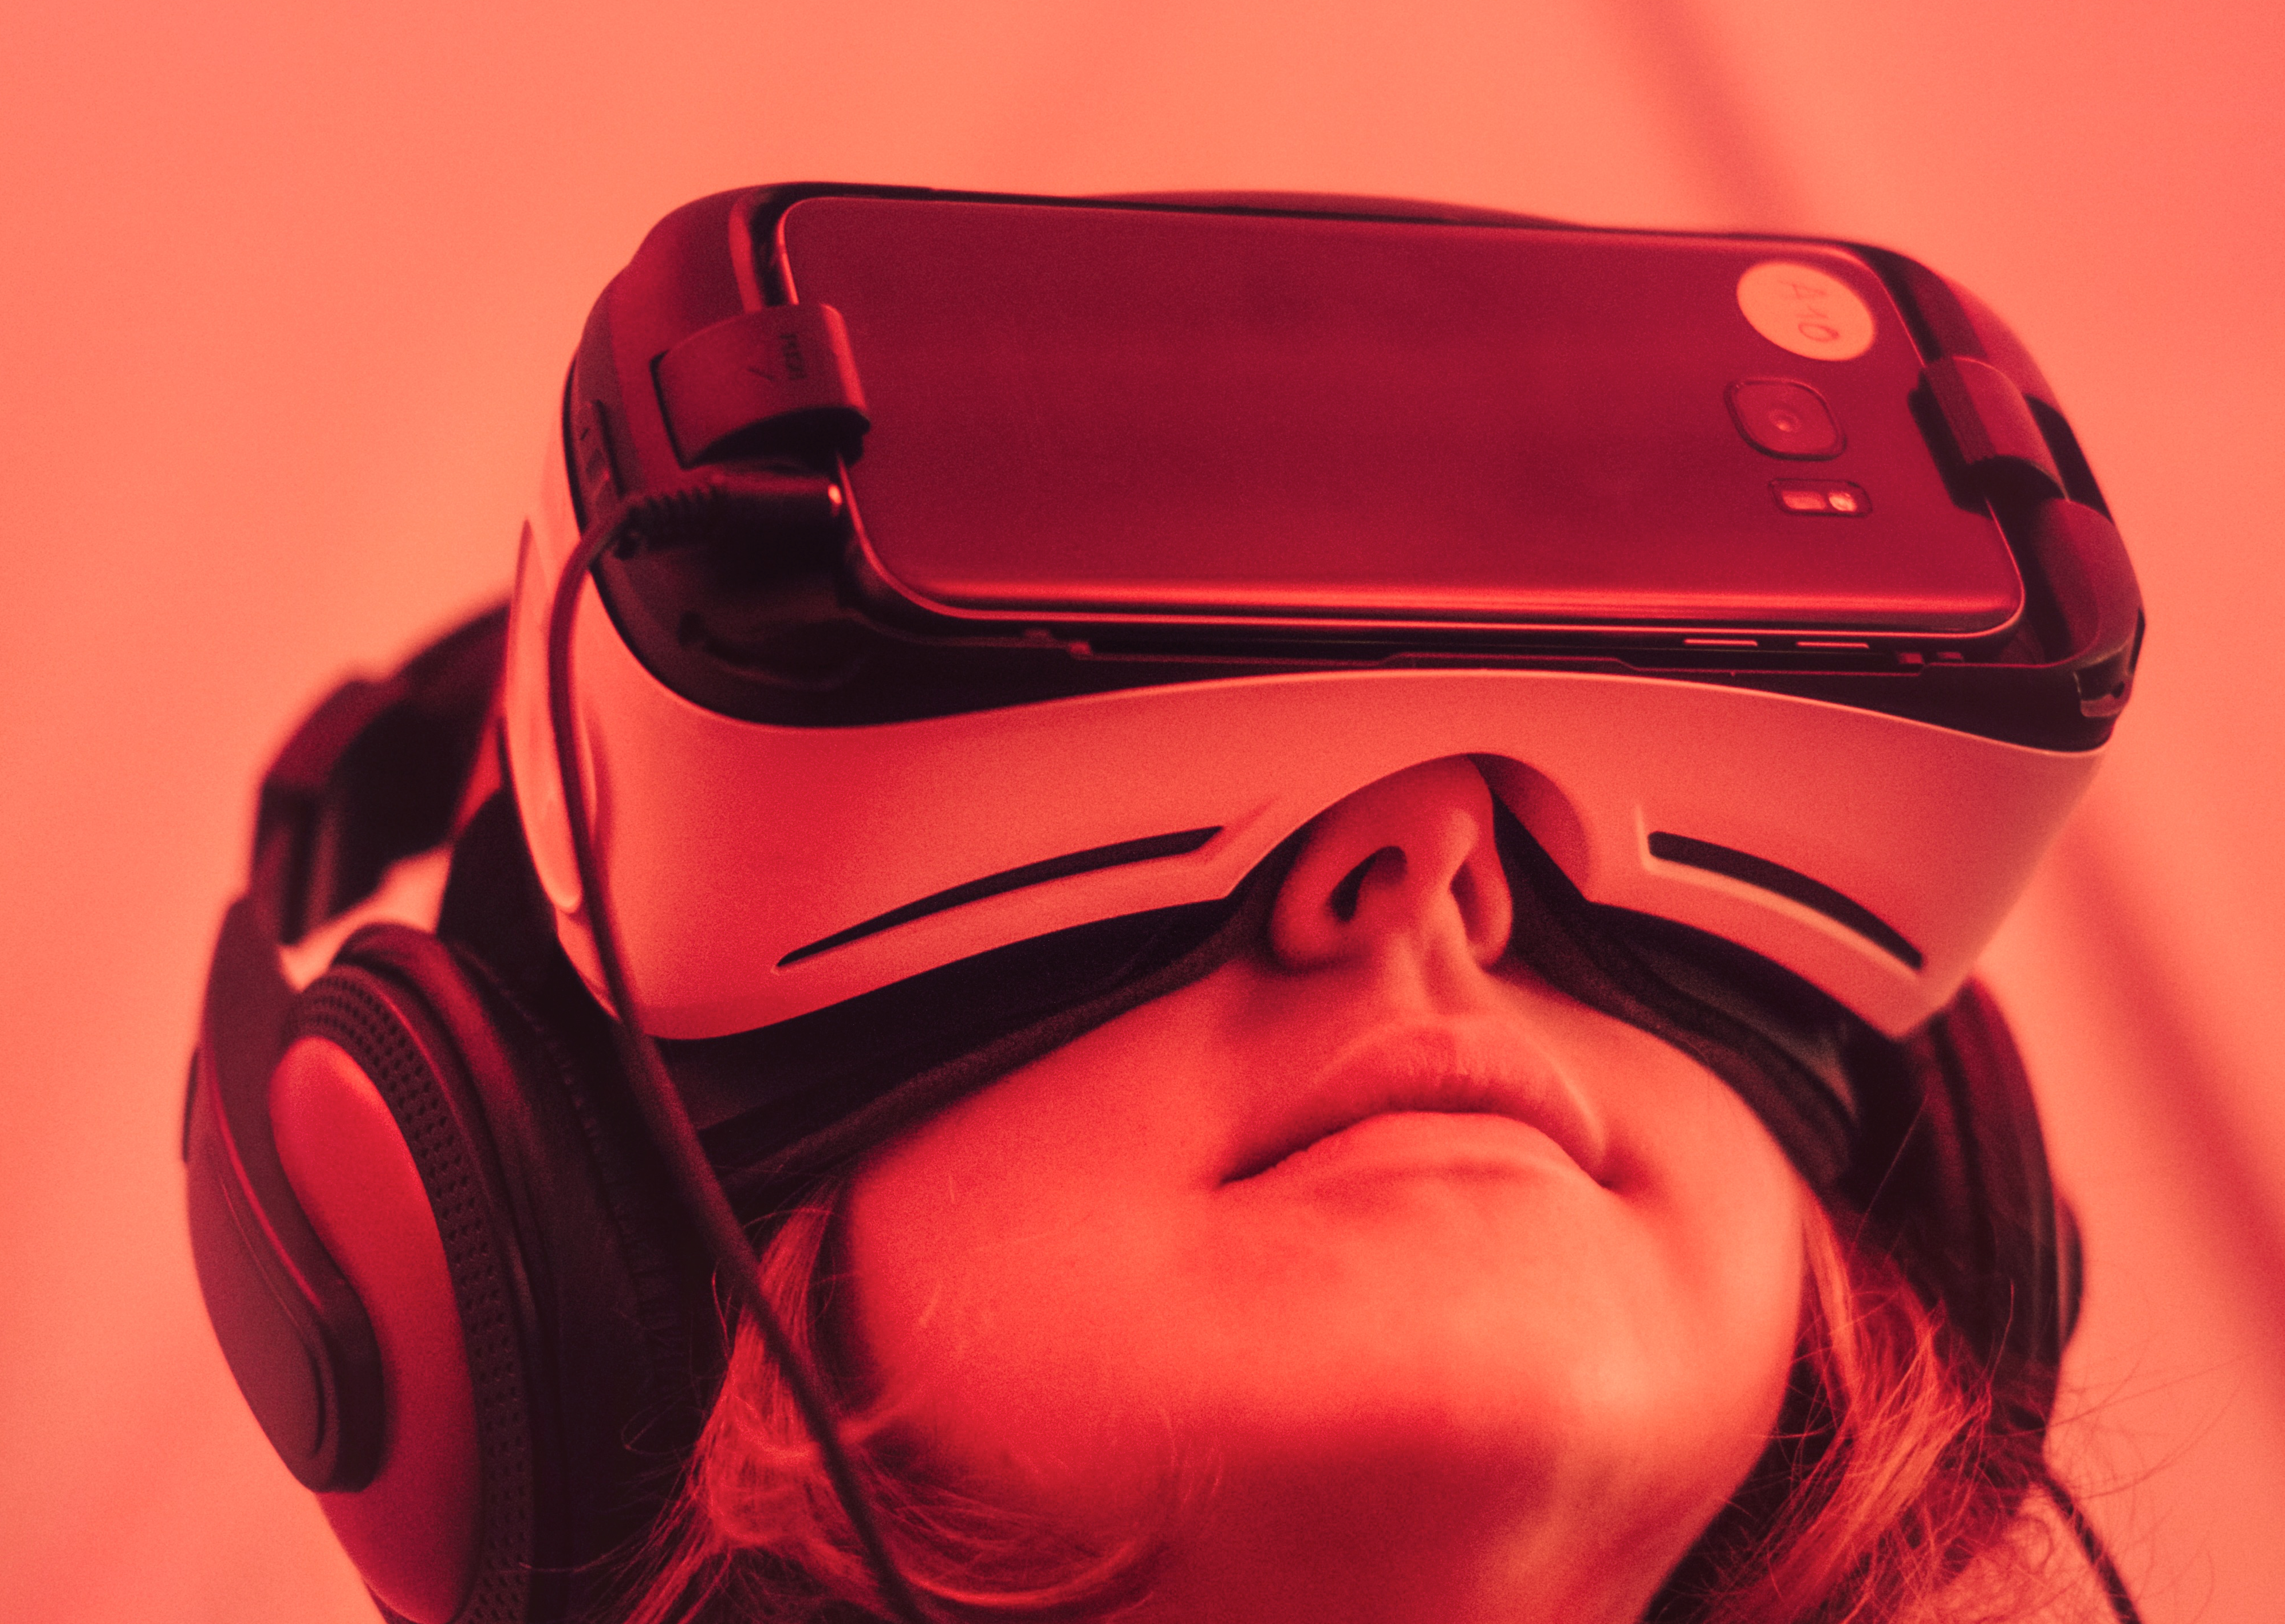 Virtual Reality at Backstage Pass, a community event for organisers